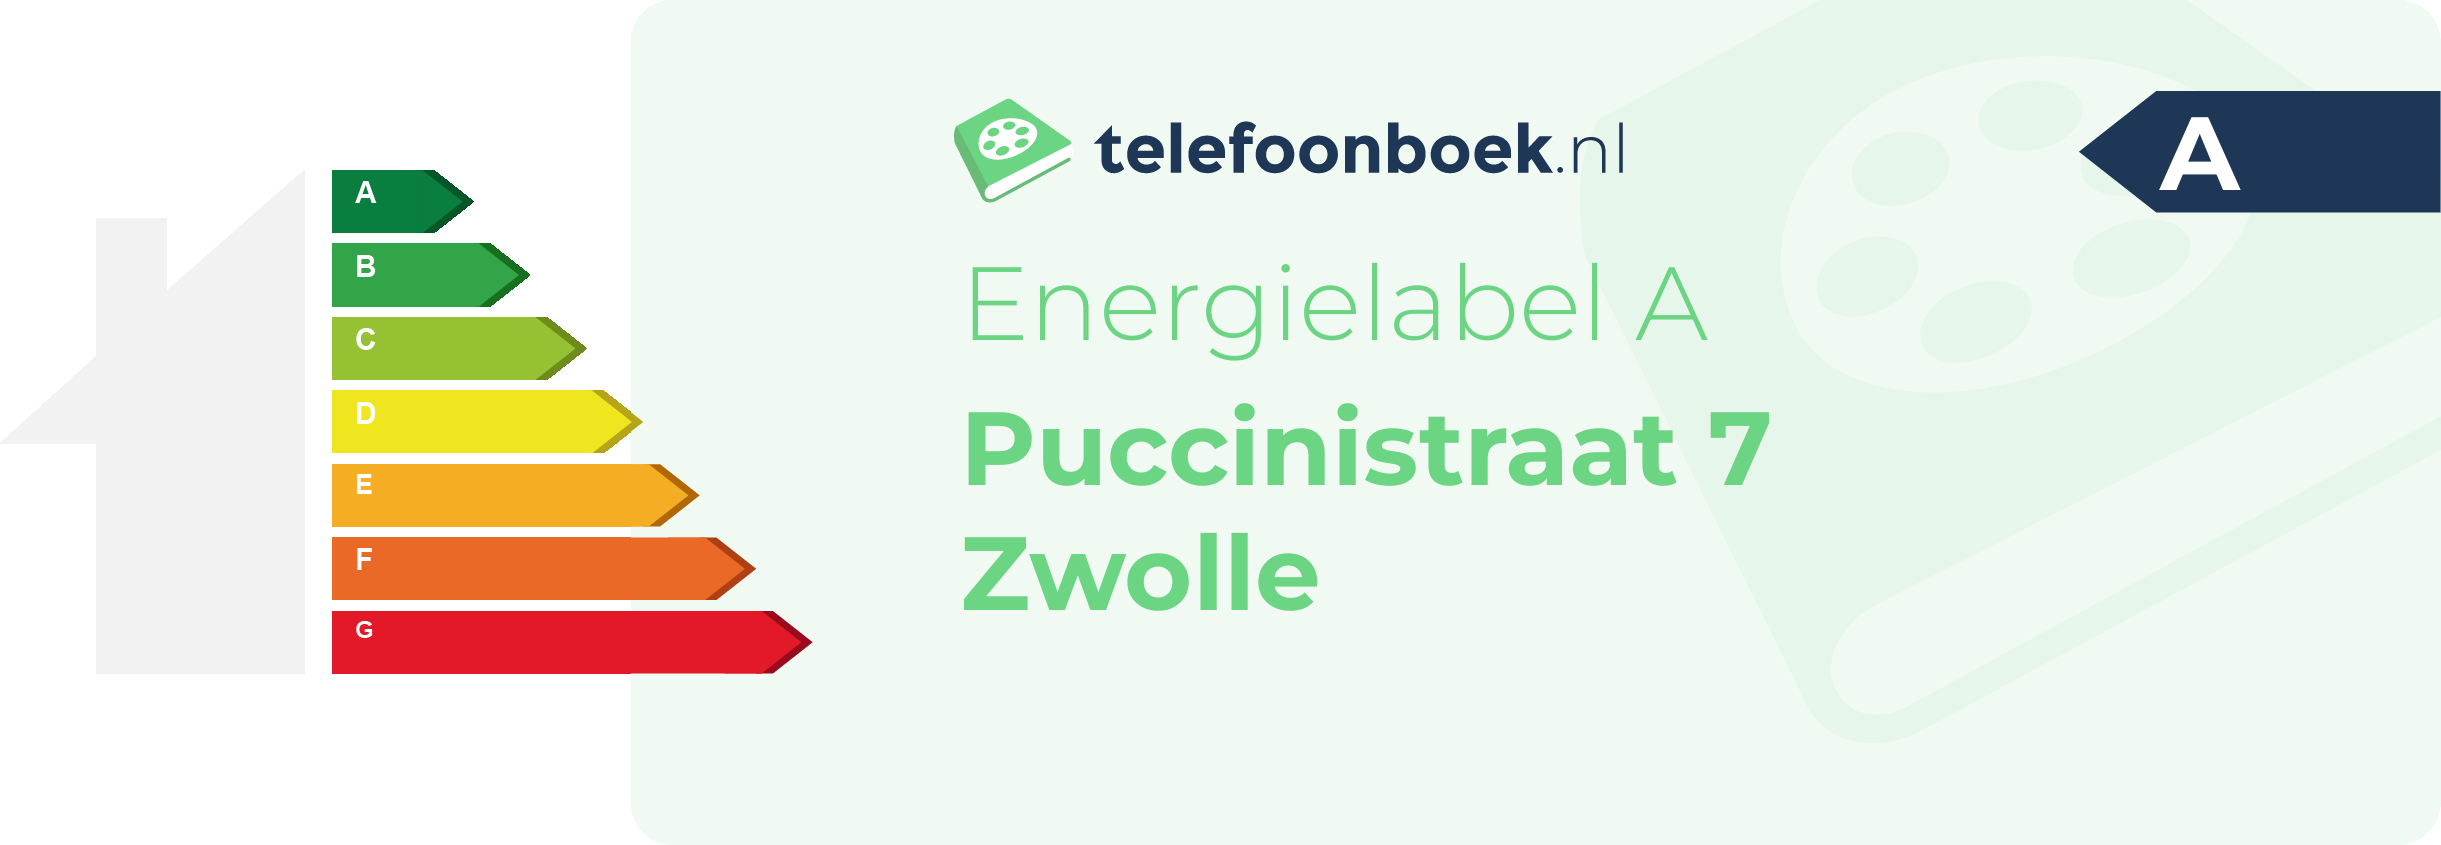 Energielabel Puccinistraat 7 Zwolle